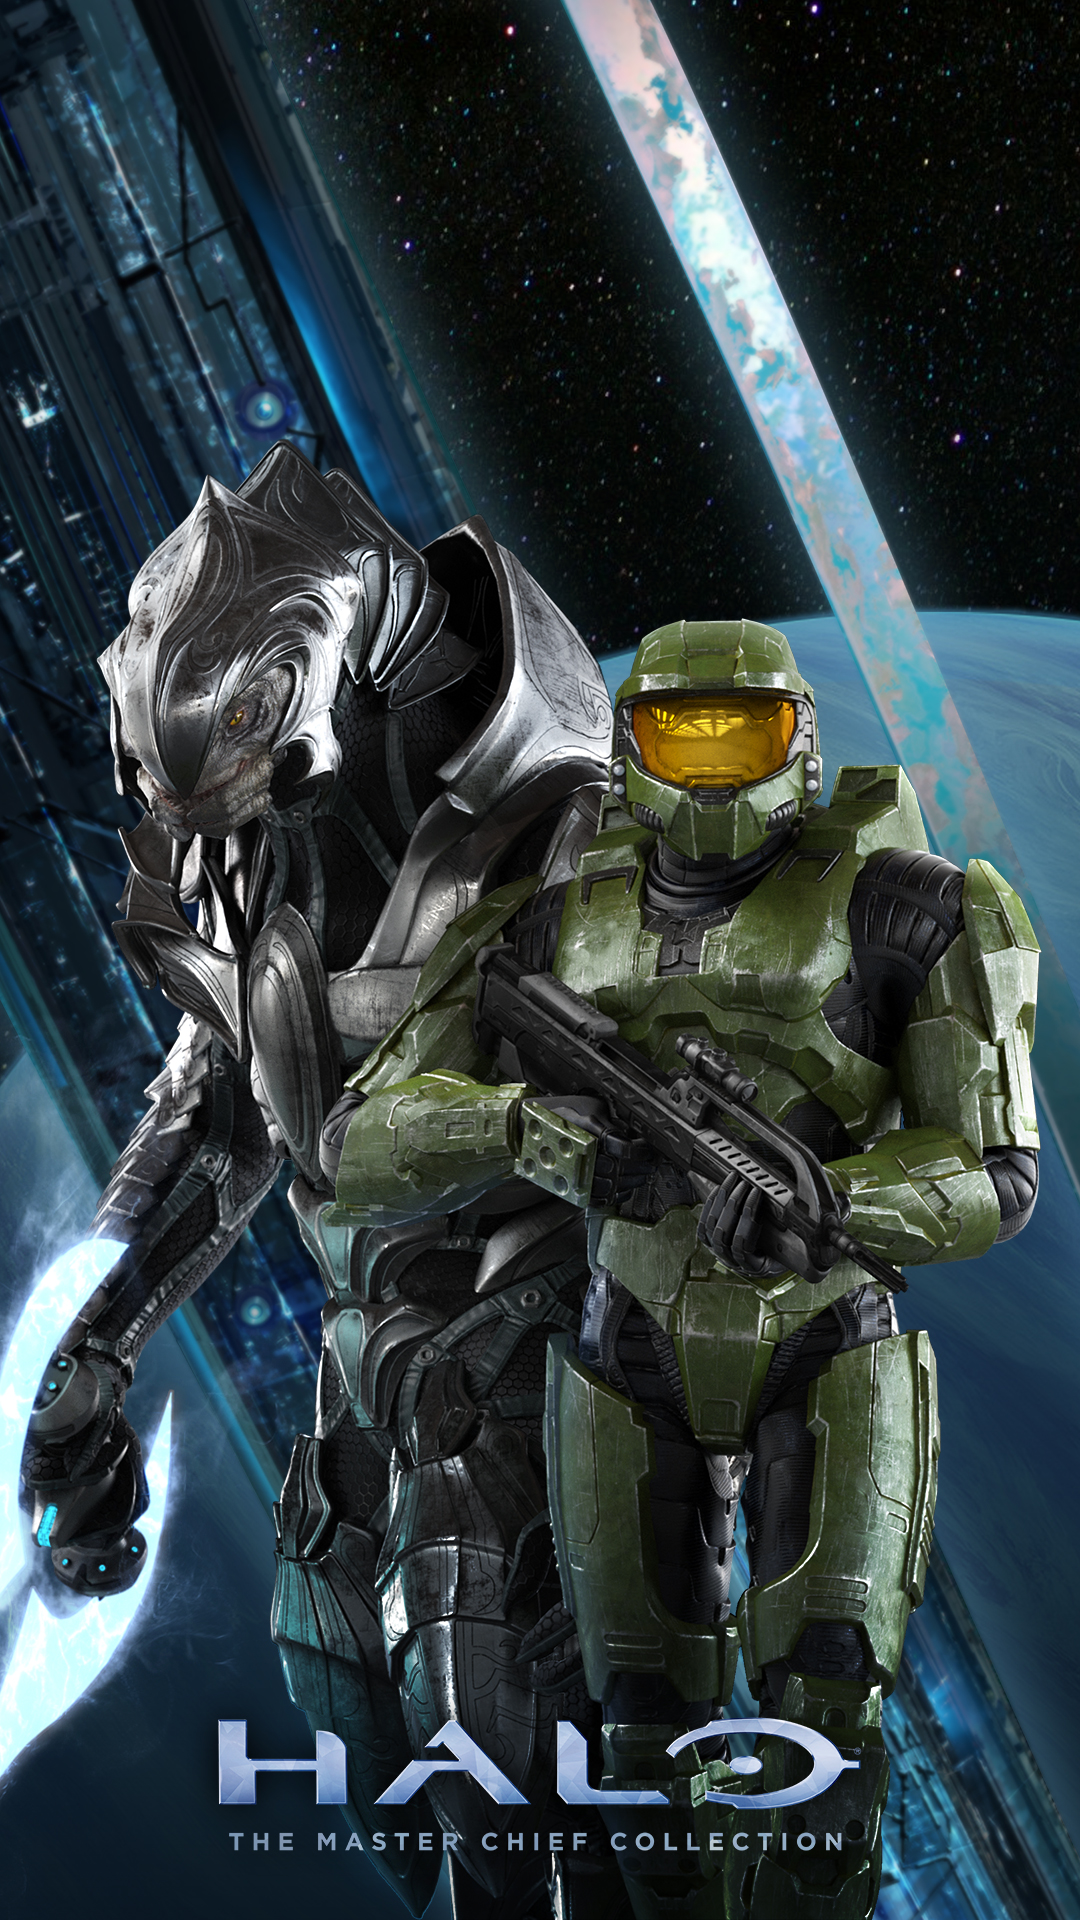 Halo Ring Along With The Arbiter And Master Chief In